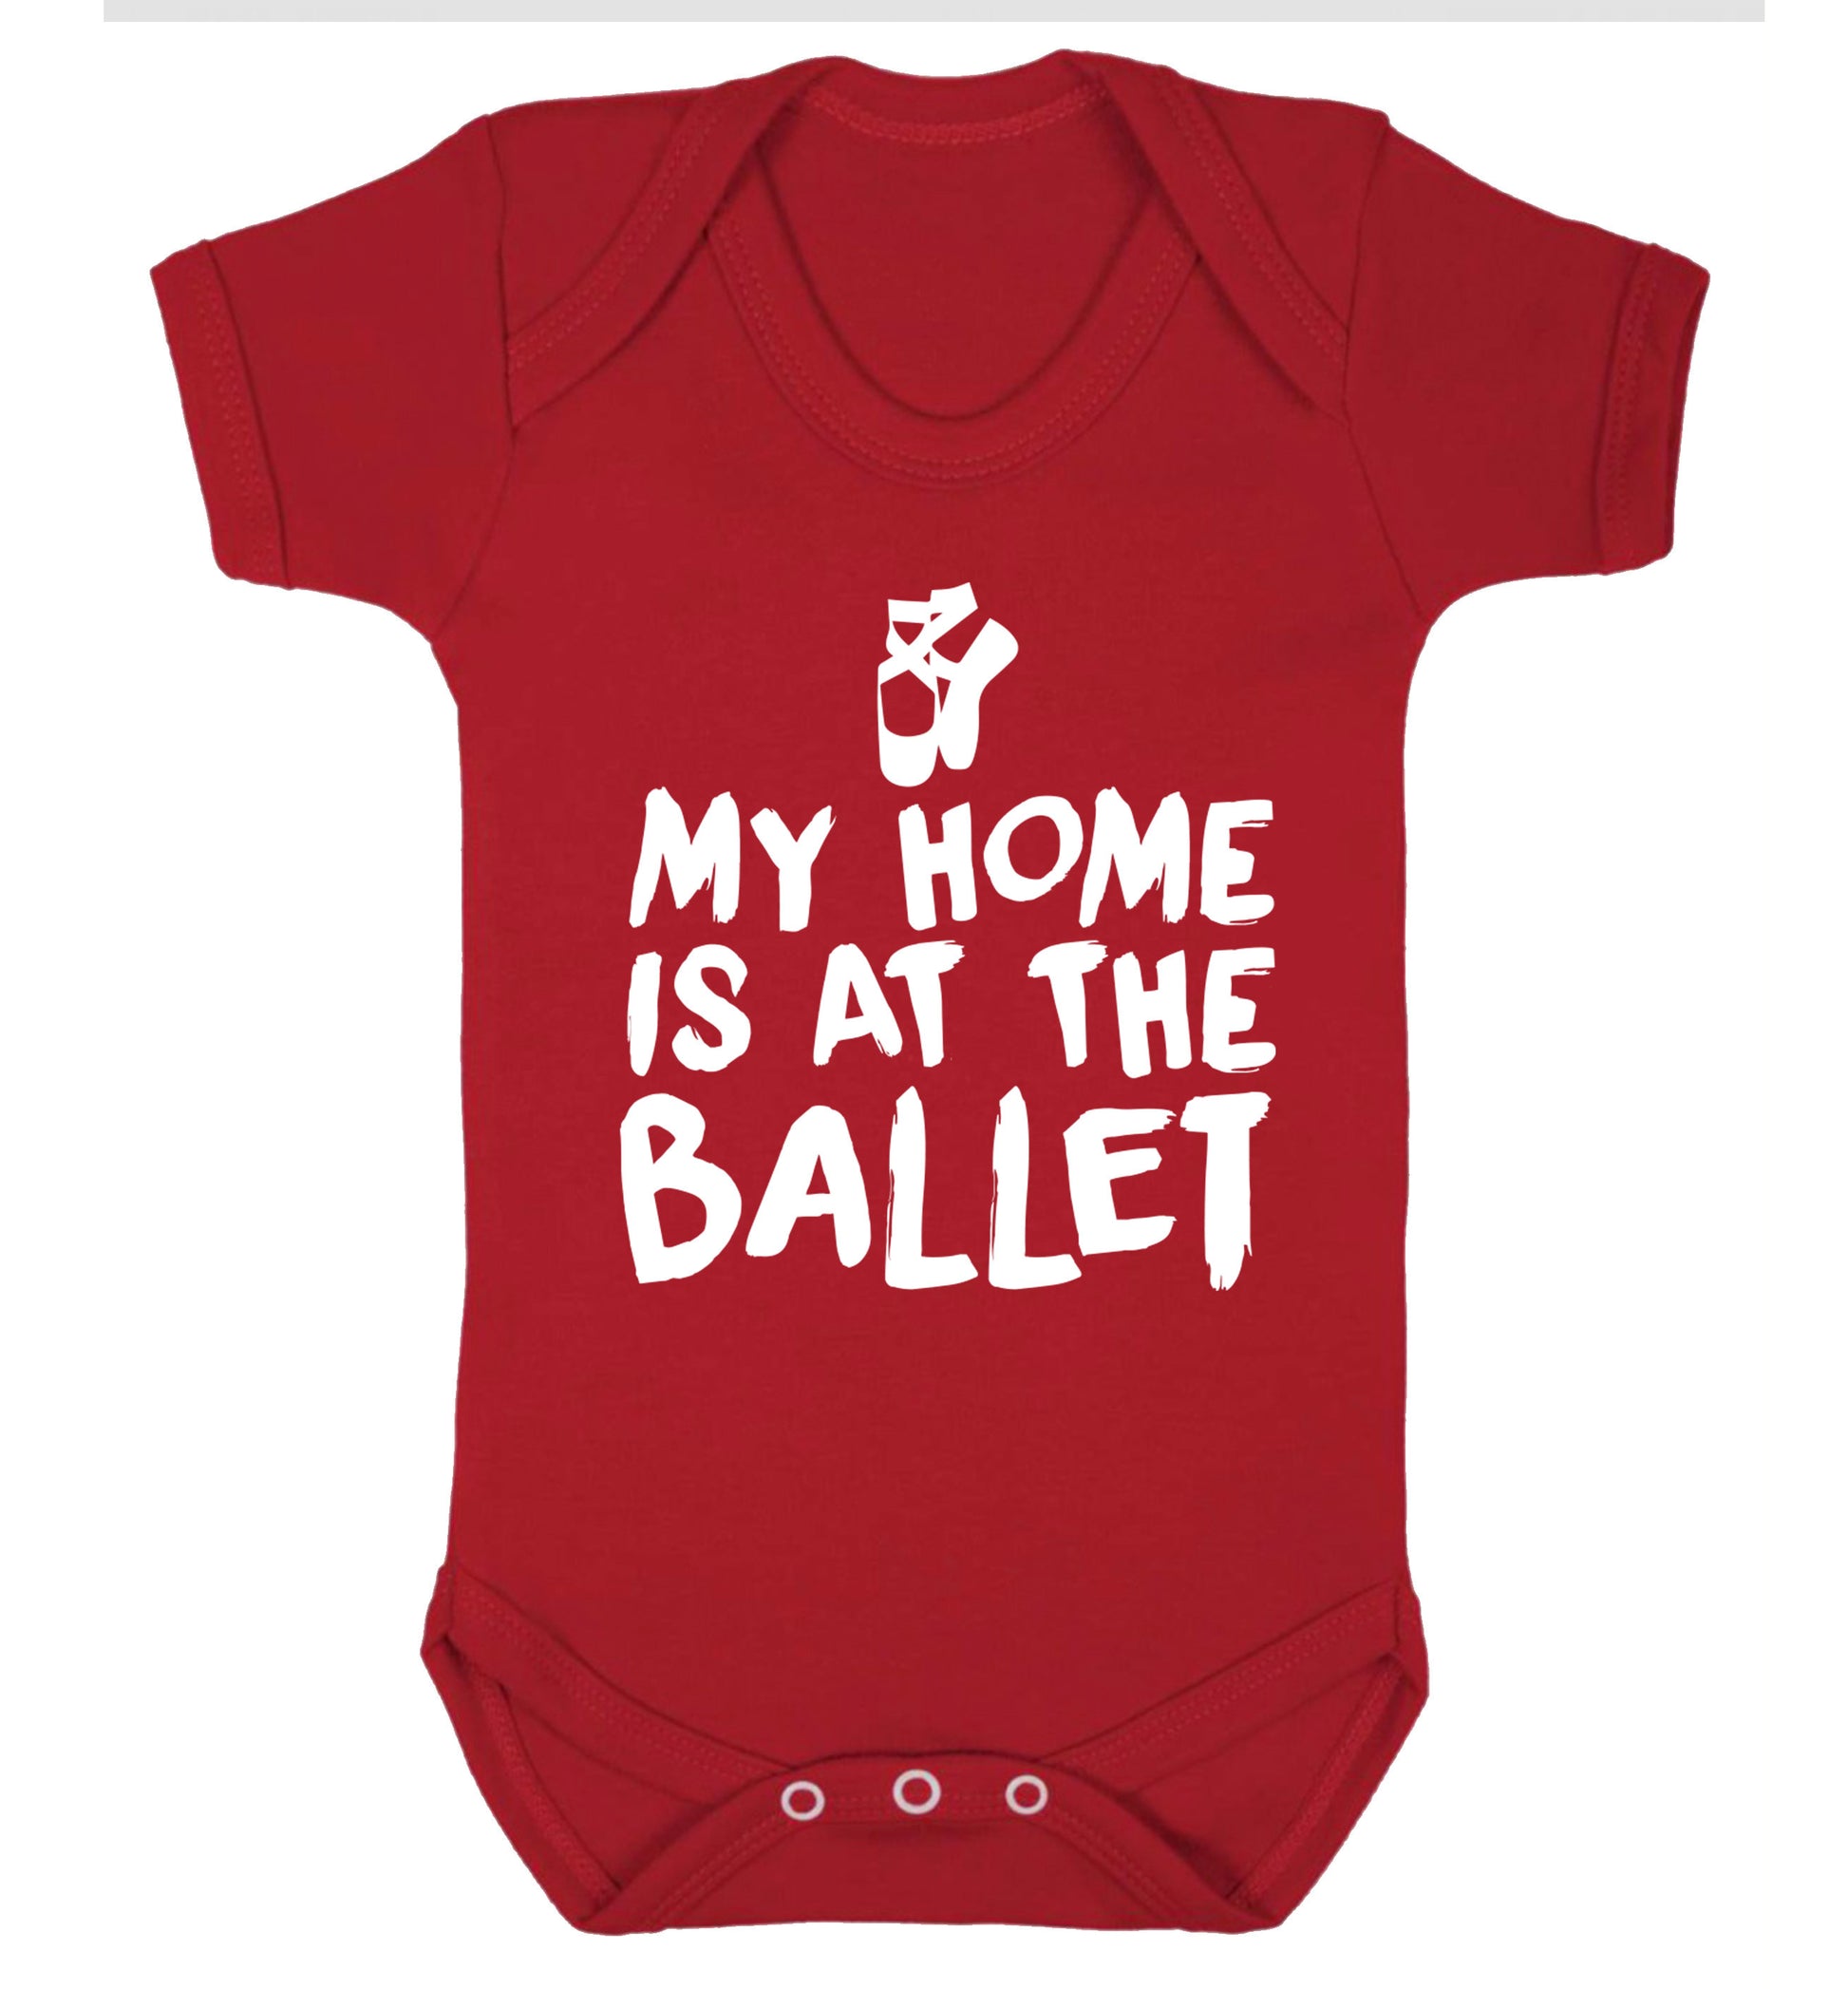 My home is at the dance studio Baby Vest red 18-24 months